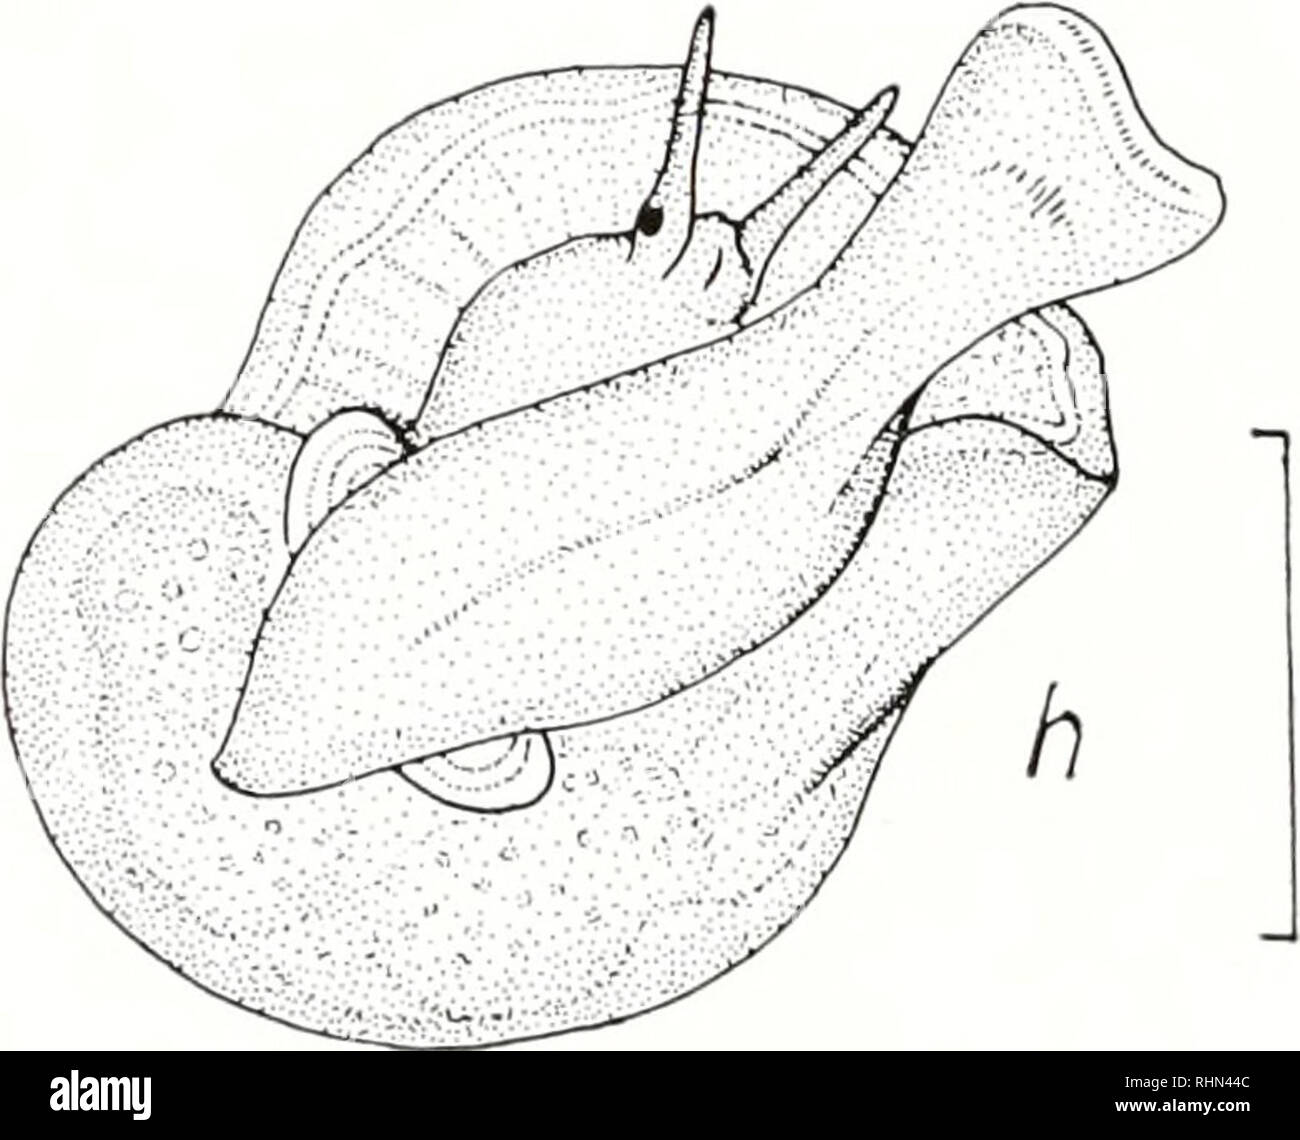 . The Biological bulletin. Biology; Zoology; Biology; Marine Biology. £f FIGURE 4. N. crassilabrum. Different stages of intracapsular development, a) a fertile egg (left side) next to a nurse-egg, in cleavage stage, b) trochophore stage with the outlines of whole nurse-eggs seen through the body wall, c-d) early veliger stage, e-f) mean and advanced veliger stage, g) pre-hatching stage with the velum in reabsorption process, h) hatching juvenile stage. The lines equal 500 face of the foot gradually differentiates a small, thin operculum. On either side of the foot a spherical statocyst is visi Stock Photo